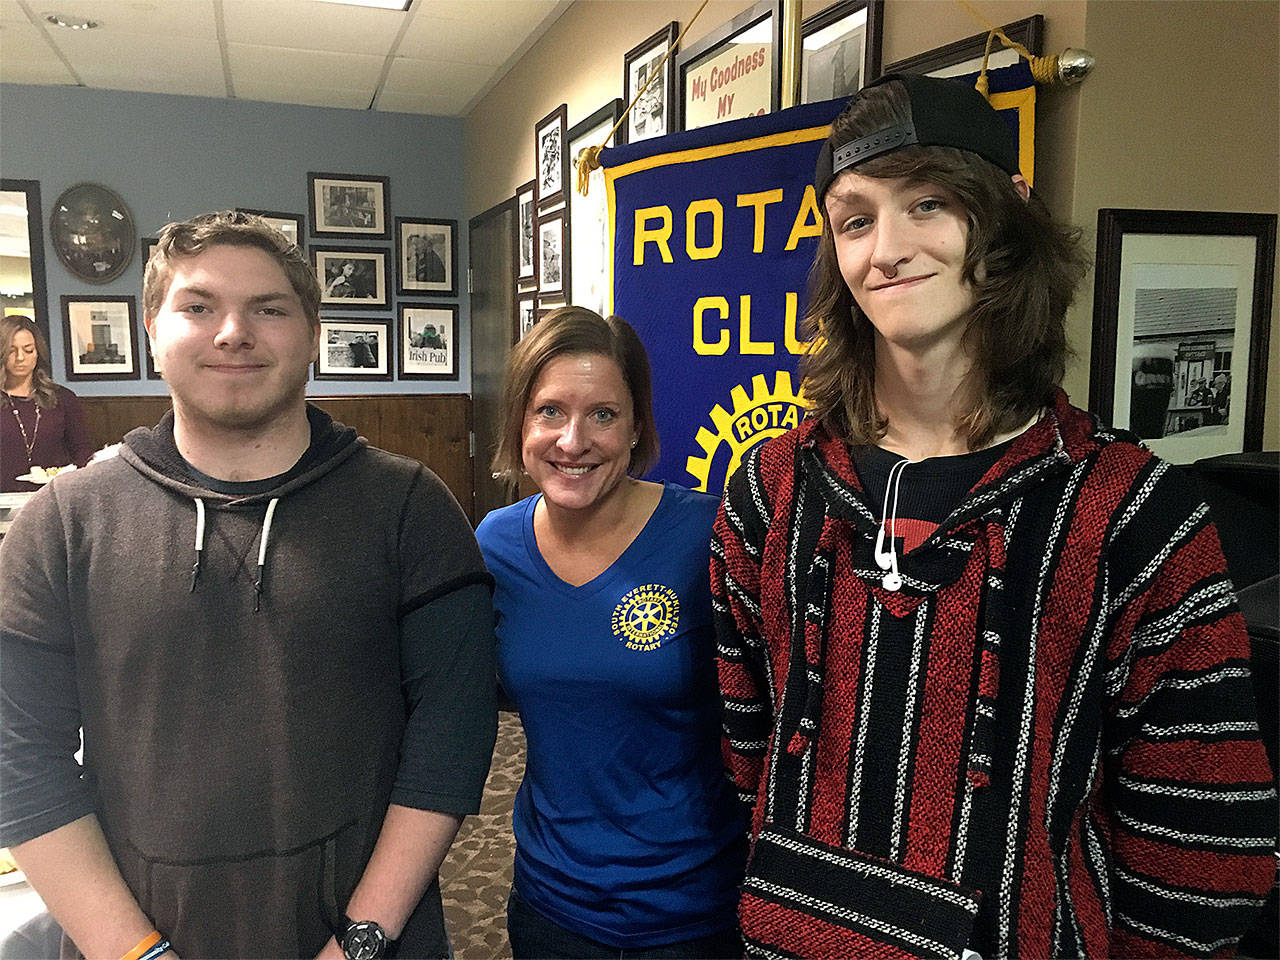 South Everett-Mukilteo Rotary Club president Julie Frauenholtz congratulates Students of the Month from ACES High School, Nik Hammond (left) and Jorden Johnson. (Contributed photo)